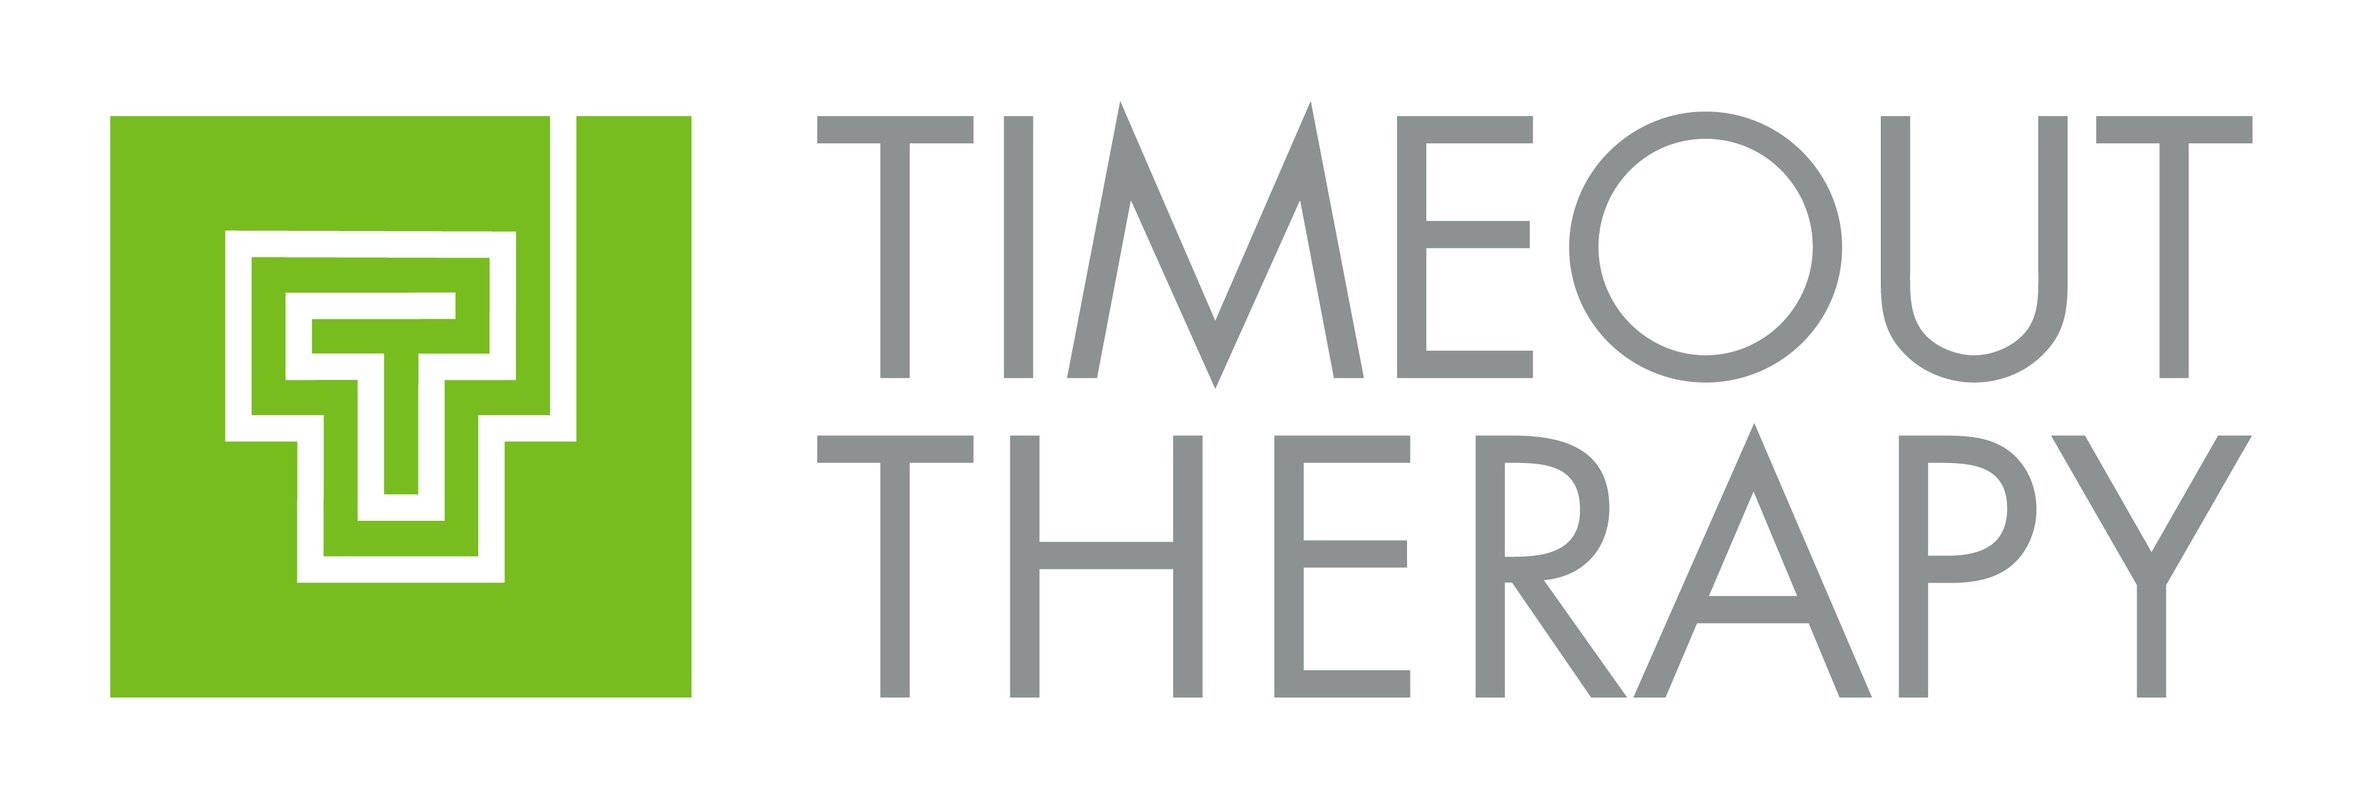 Timeout-Therapy